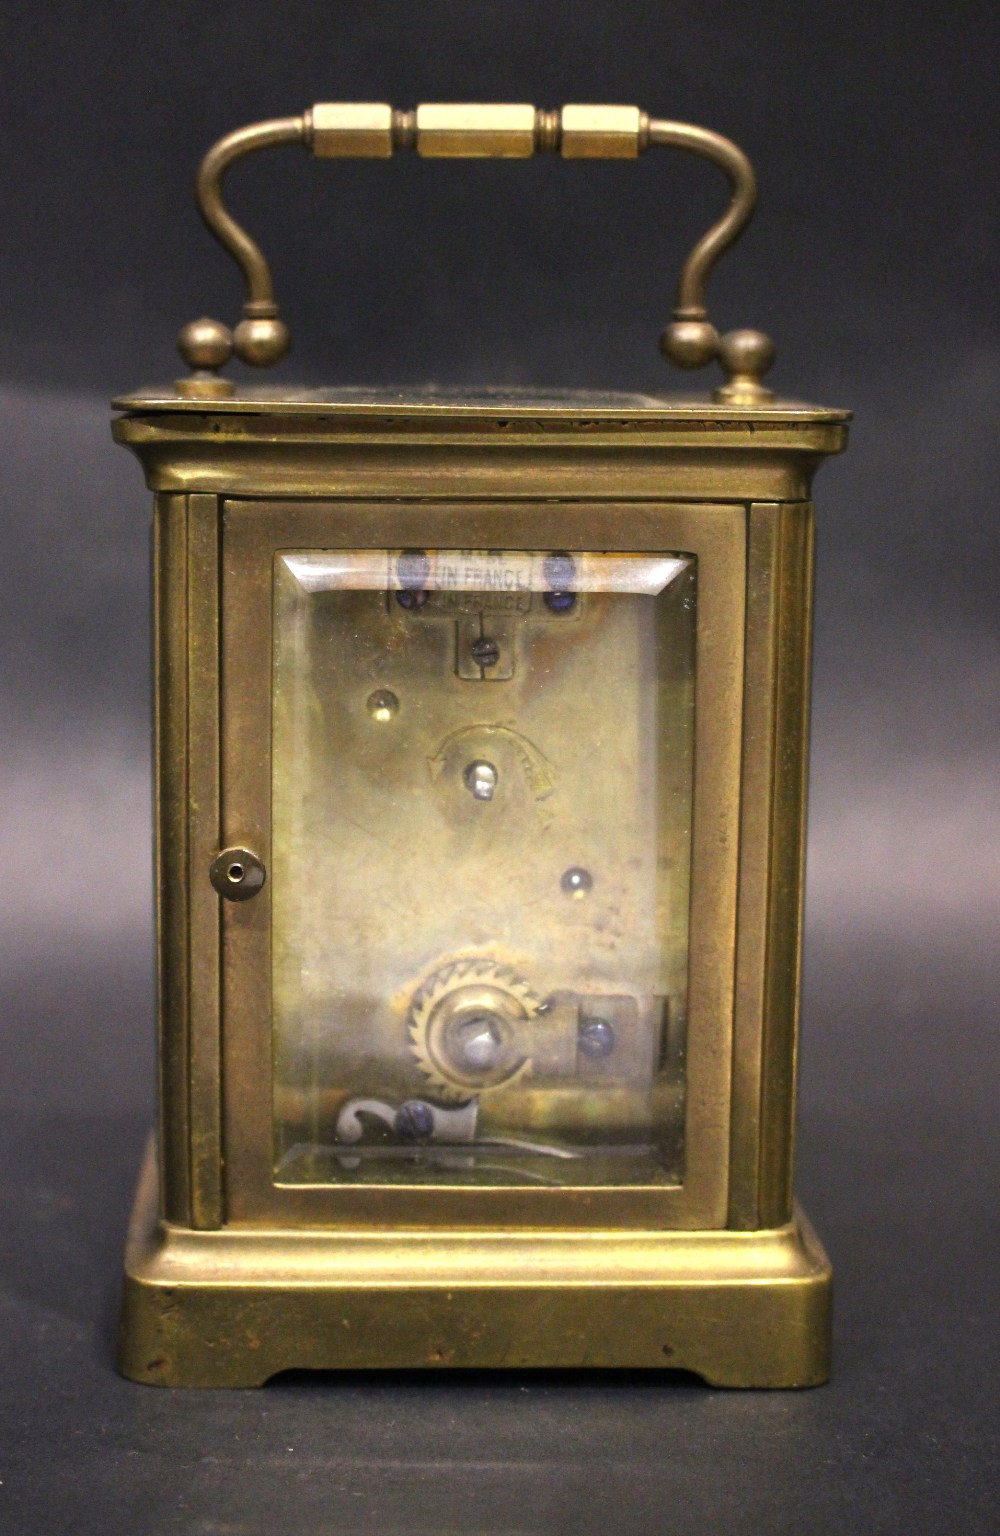 A FRENCH CASH CARRIAGE CLOCK, brass frame, bevelled glass on all sides, 5" x 4" x 3.5" approx case - Image 6 of 7